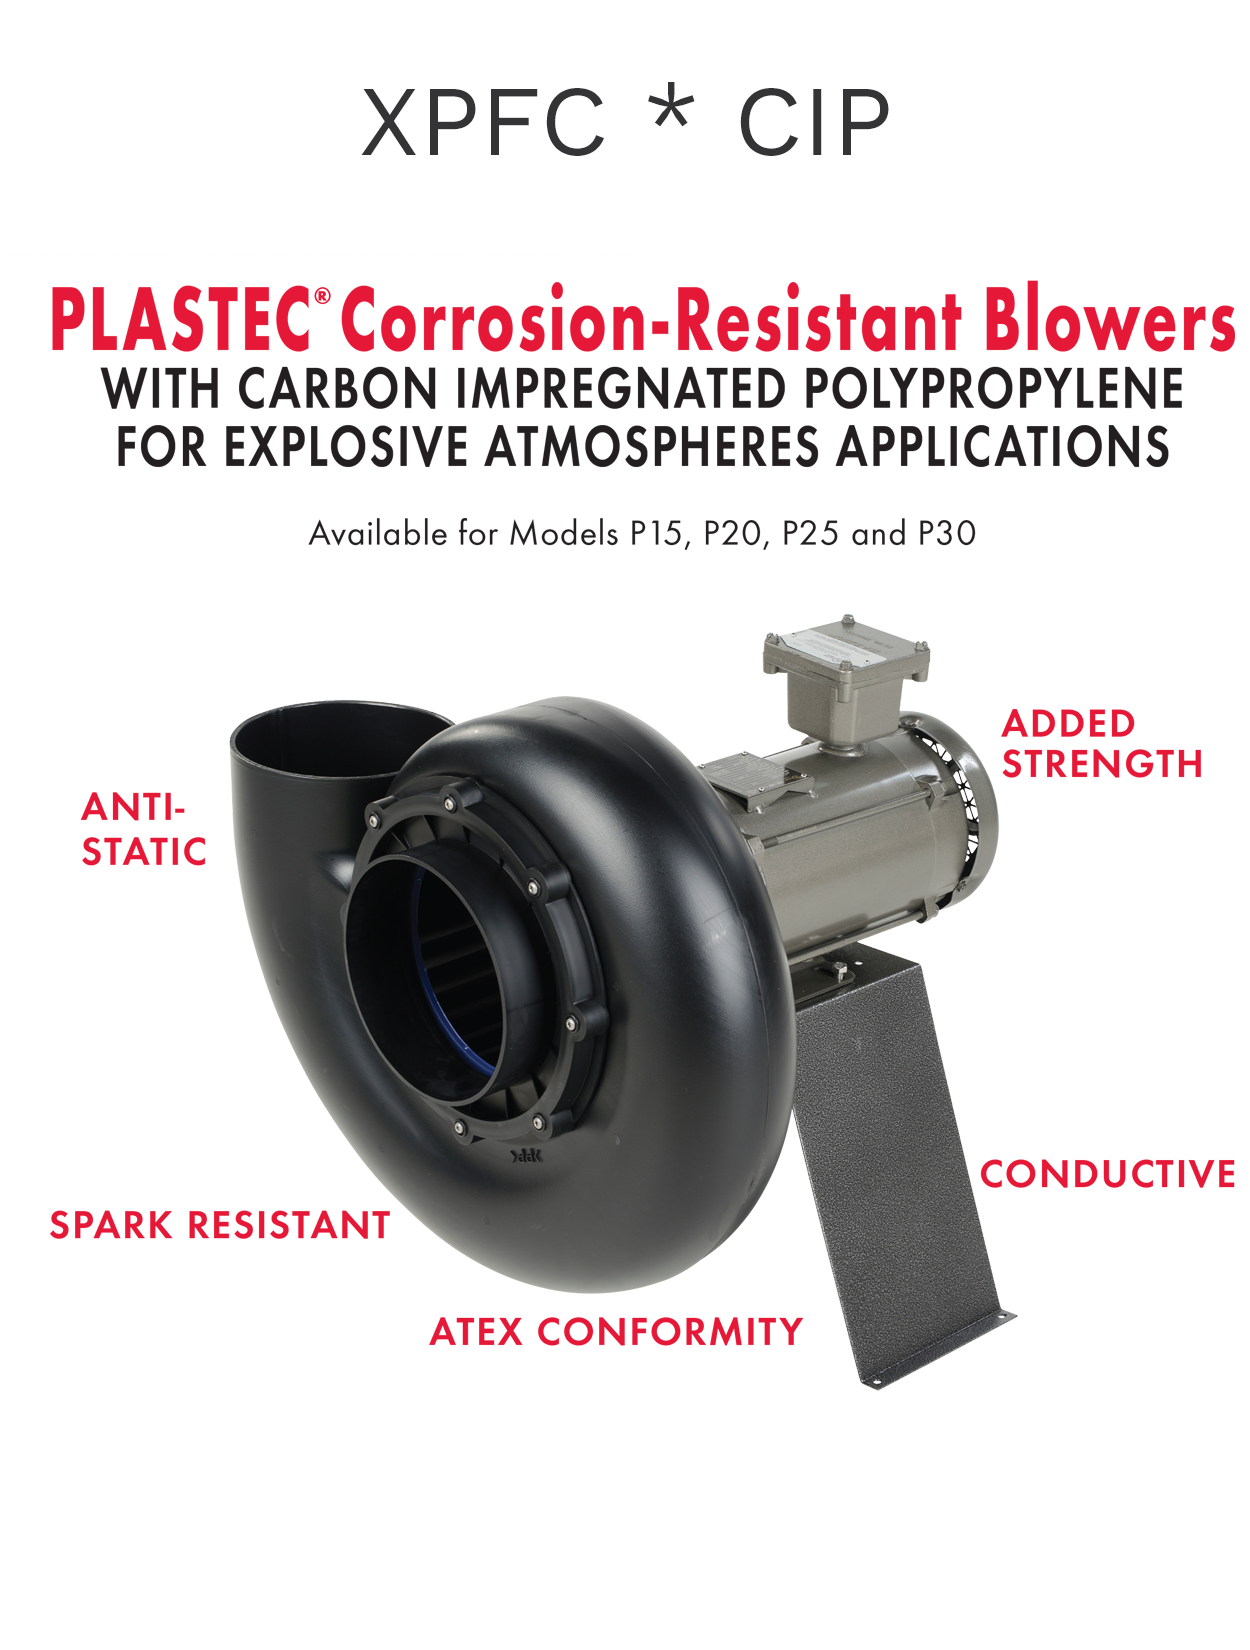 Plastec 25 Direct Drive Forward Curve Polypropylene Blower available in explosion-proof option made with Carbon Impregnated Polypropylene